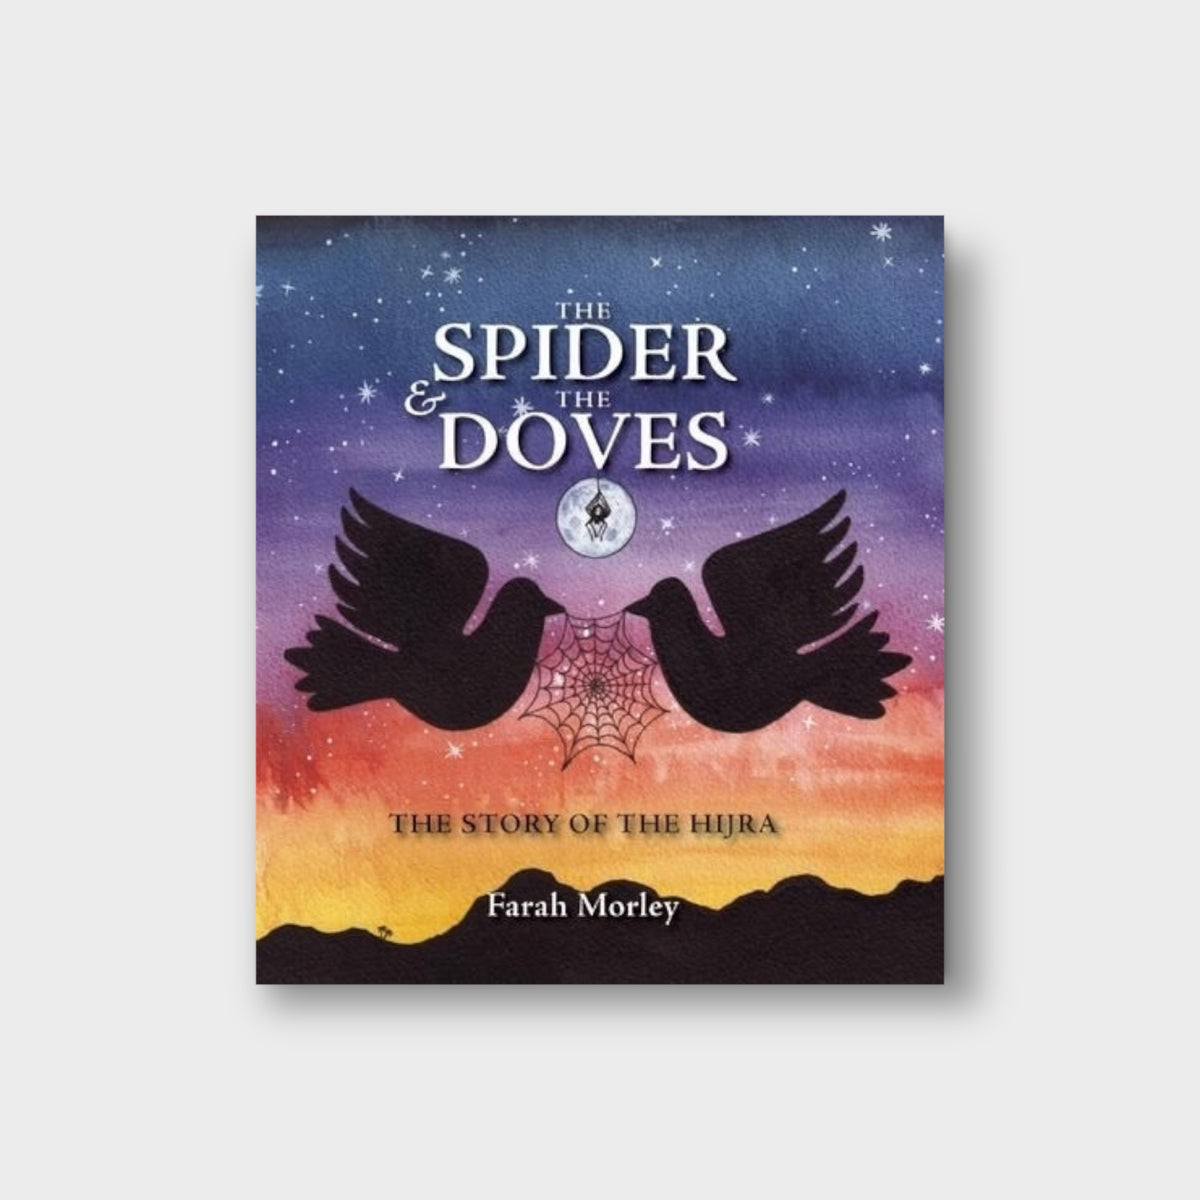 The Spider and the Doves